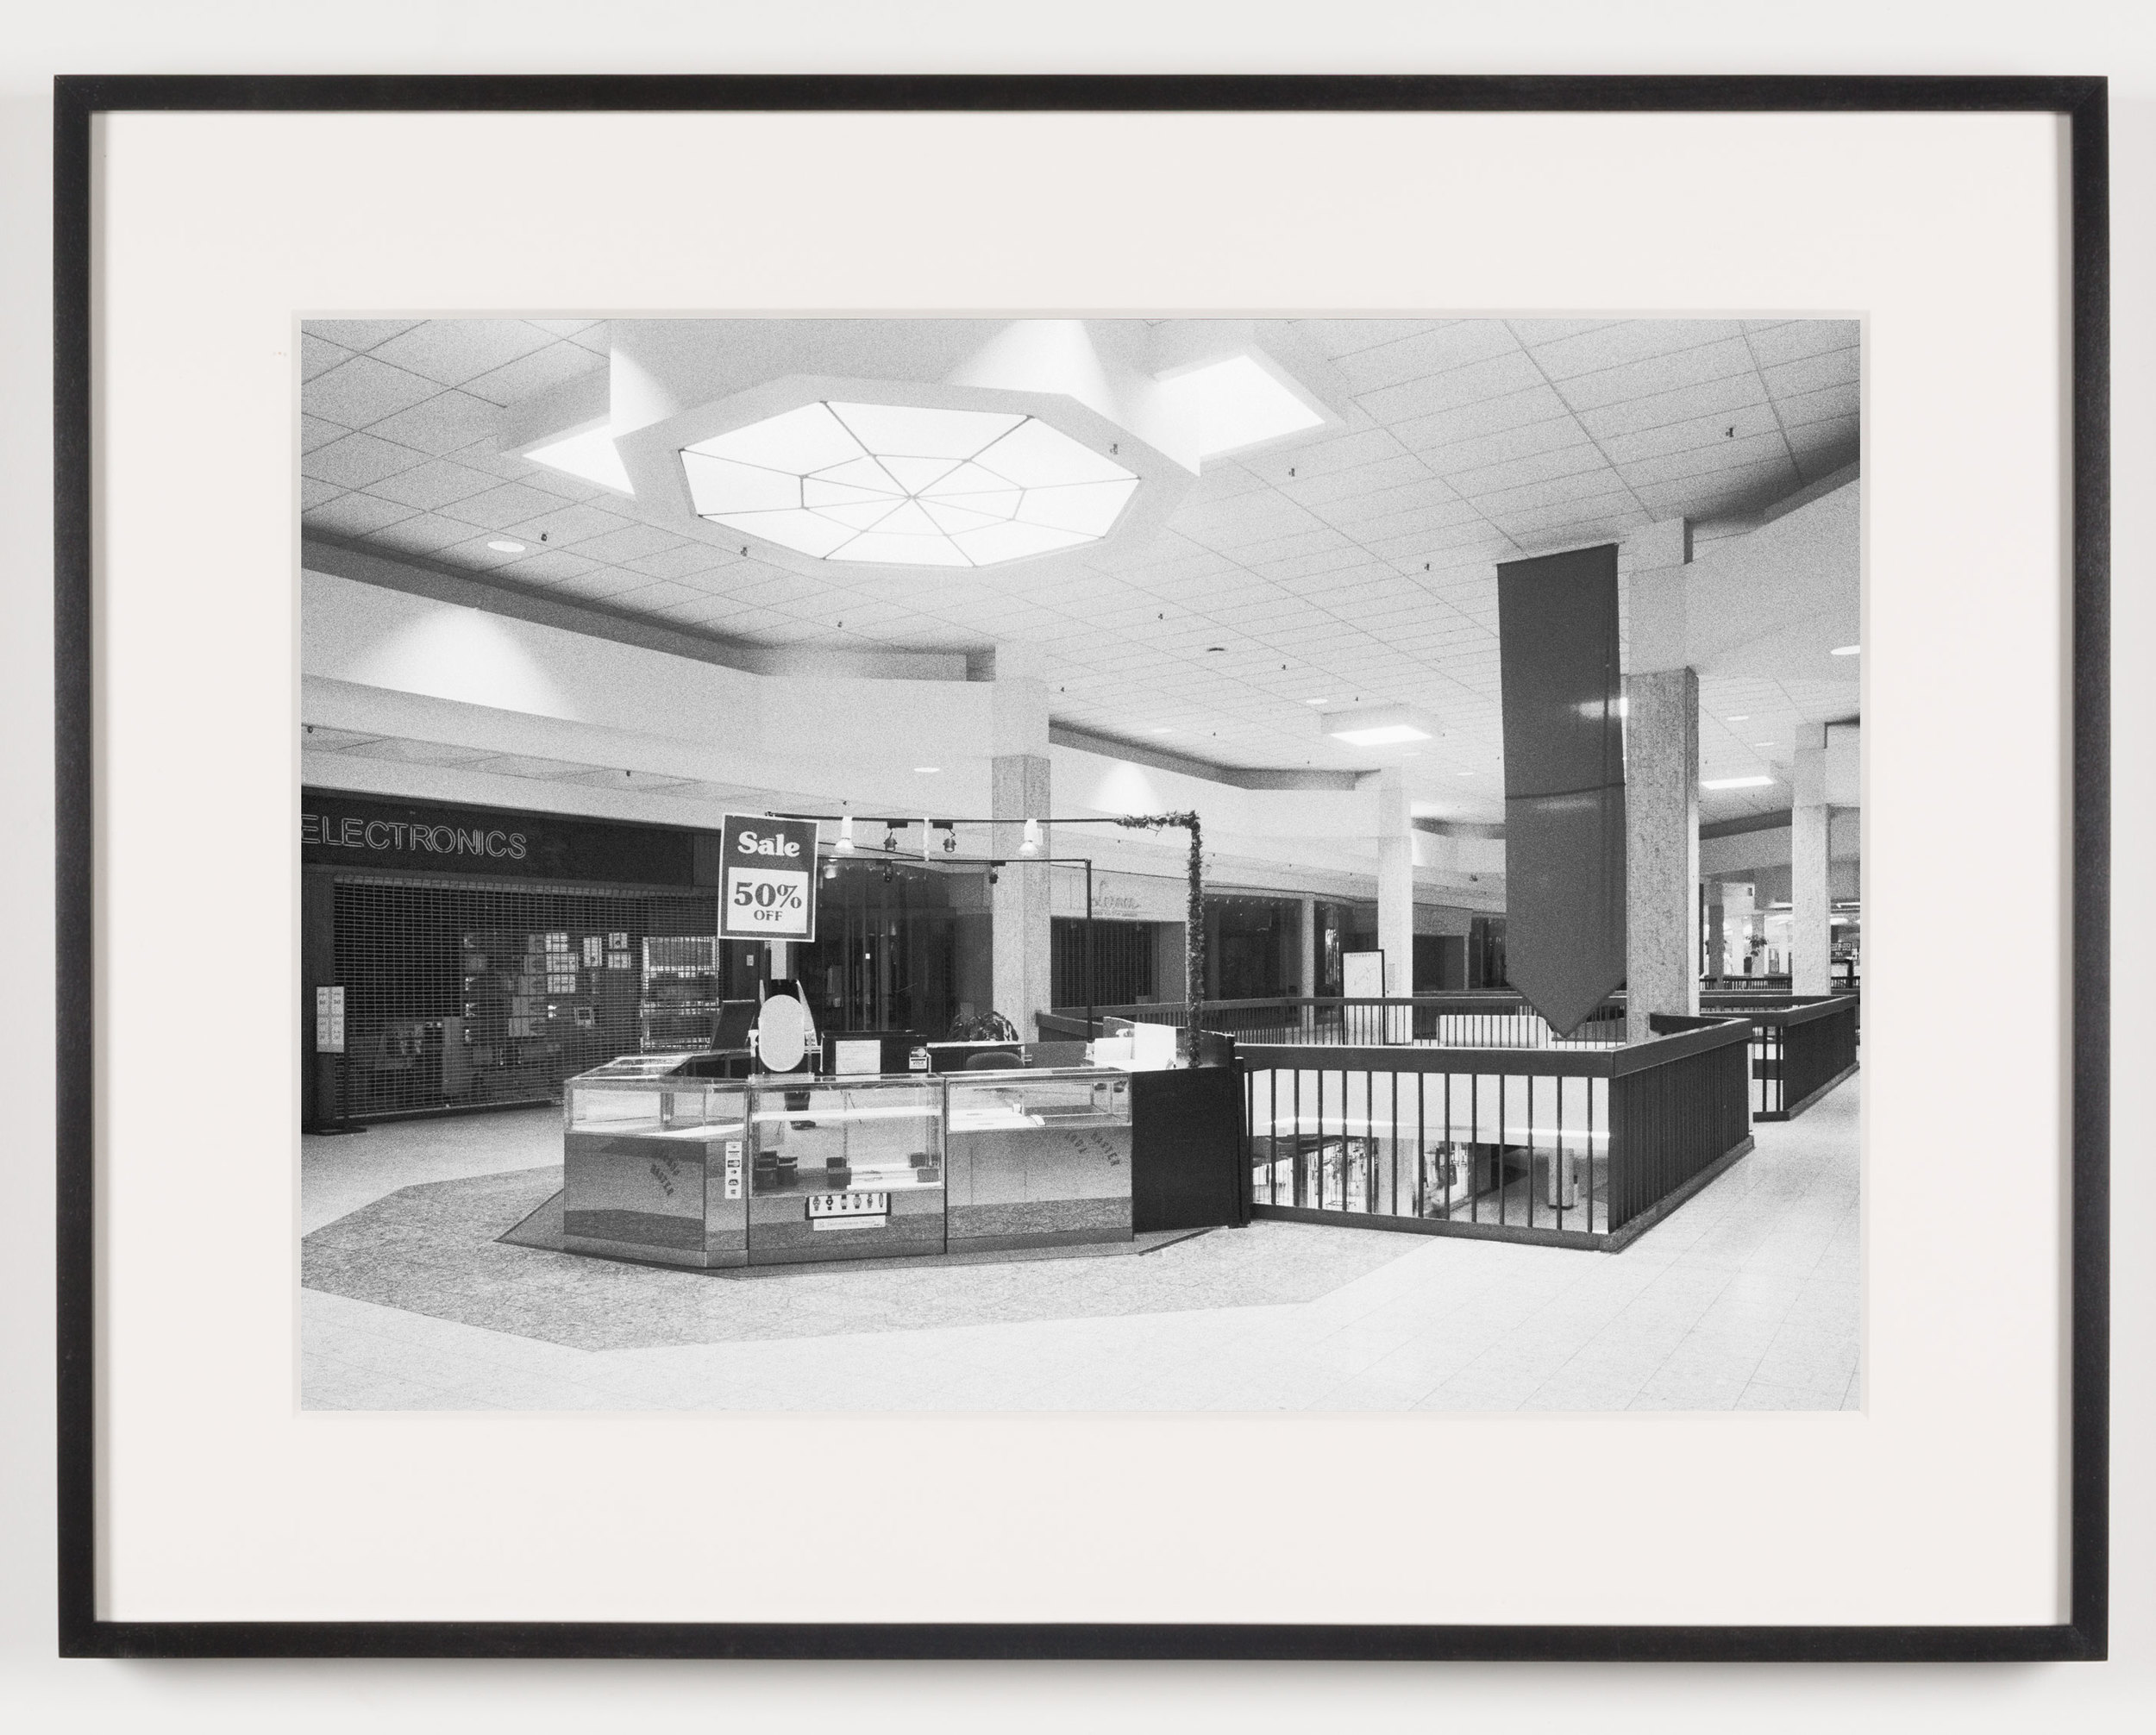   Randall Park Mall ('Electronics') North Randall, OH, Est. 1976, Demo. 2014    2011   Epson Ultrachrome K3 archival ink jet print on Hahnemühle Photo Rag paper  21 5/8 x 28 1/8 inches   American Passages, 2001–2011     